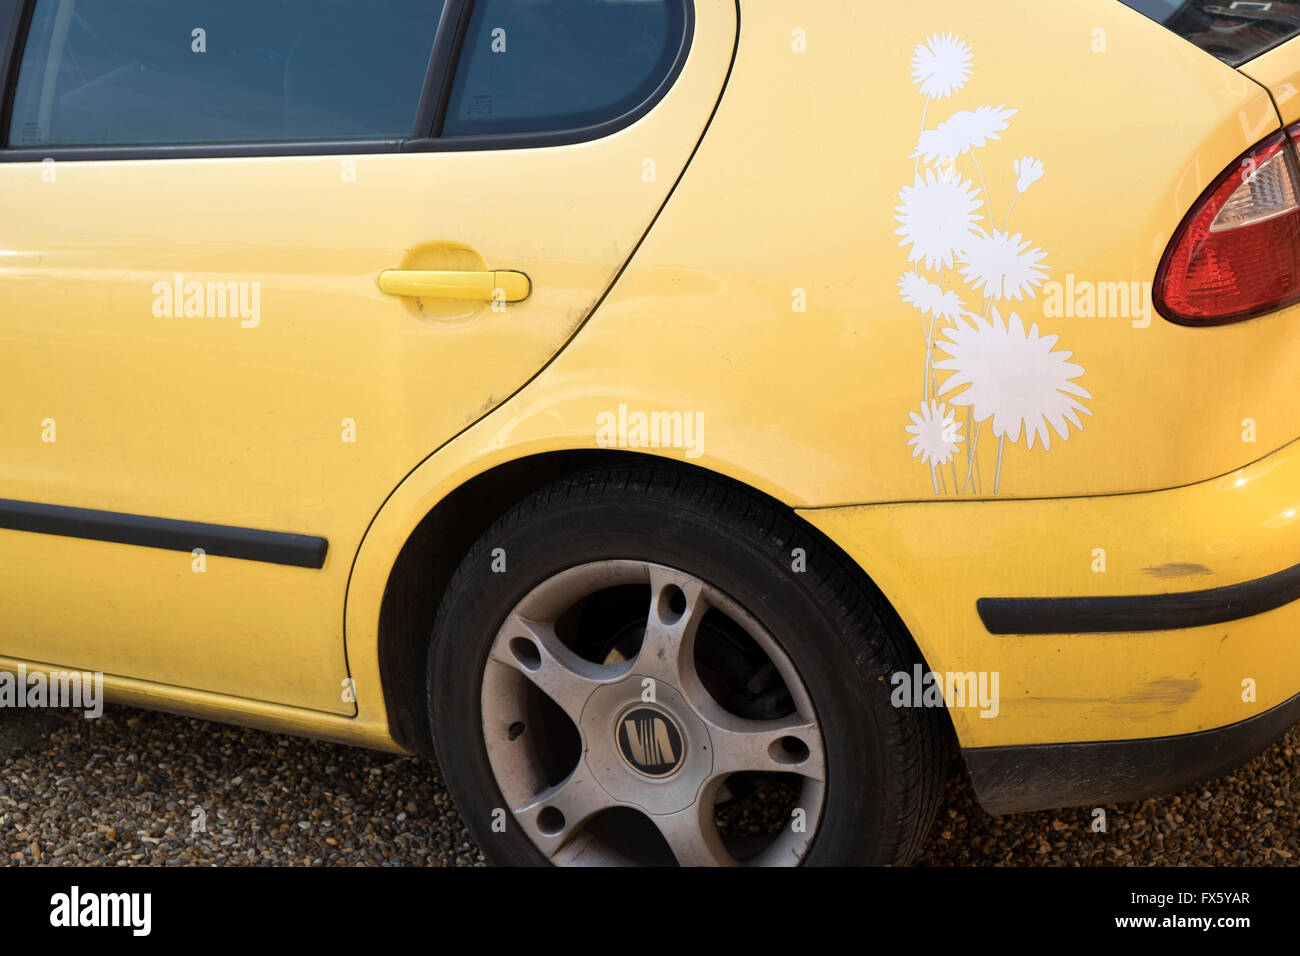 Flower stickers on a Seat Ibiza car Stock Photo